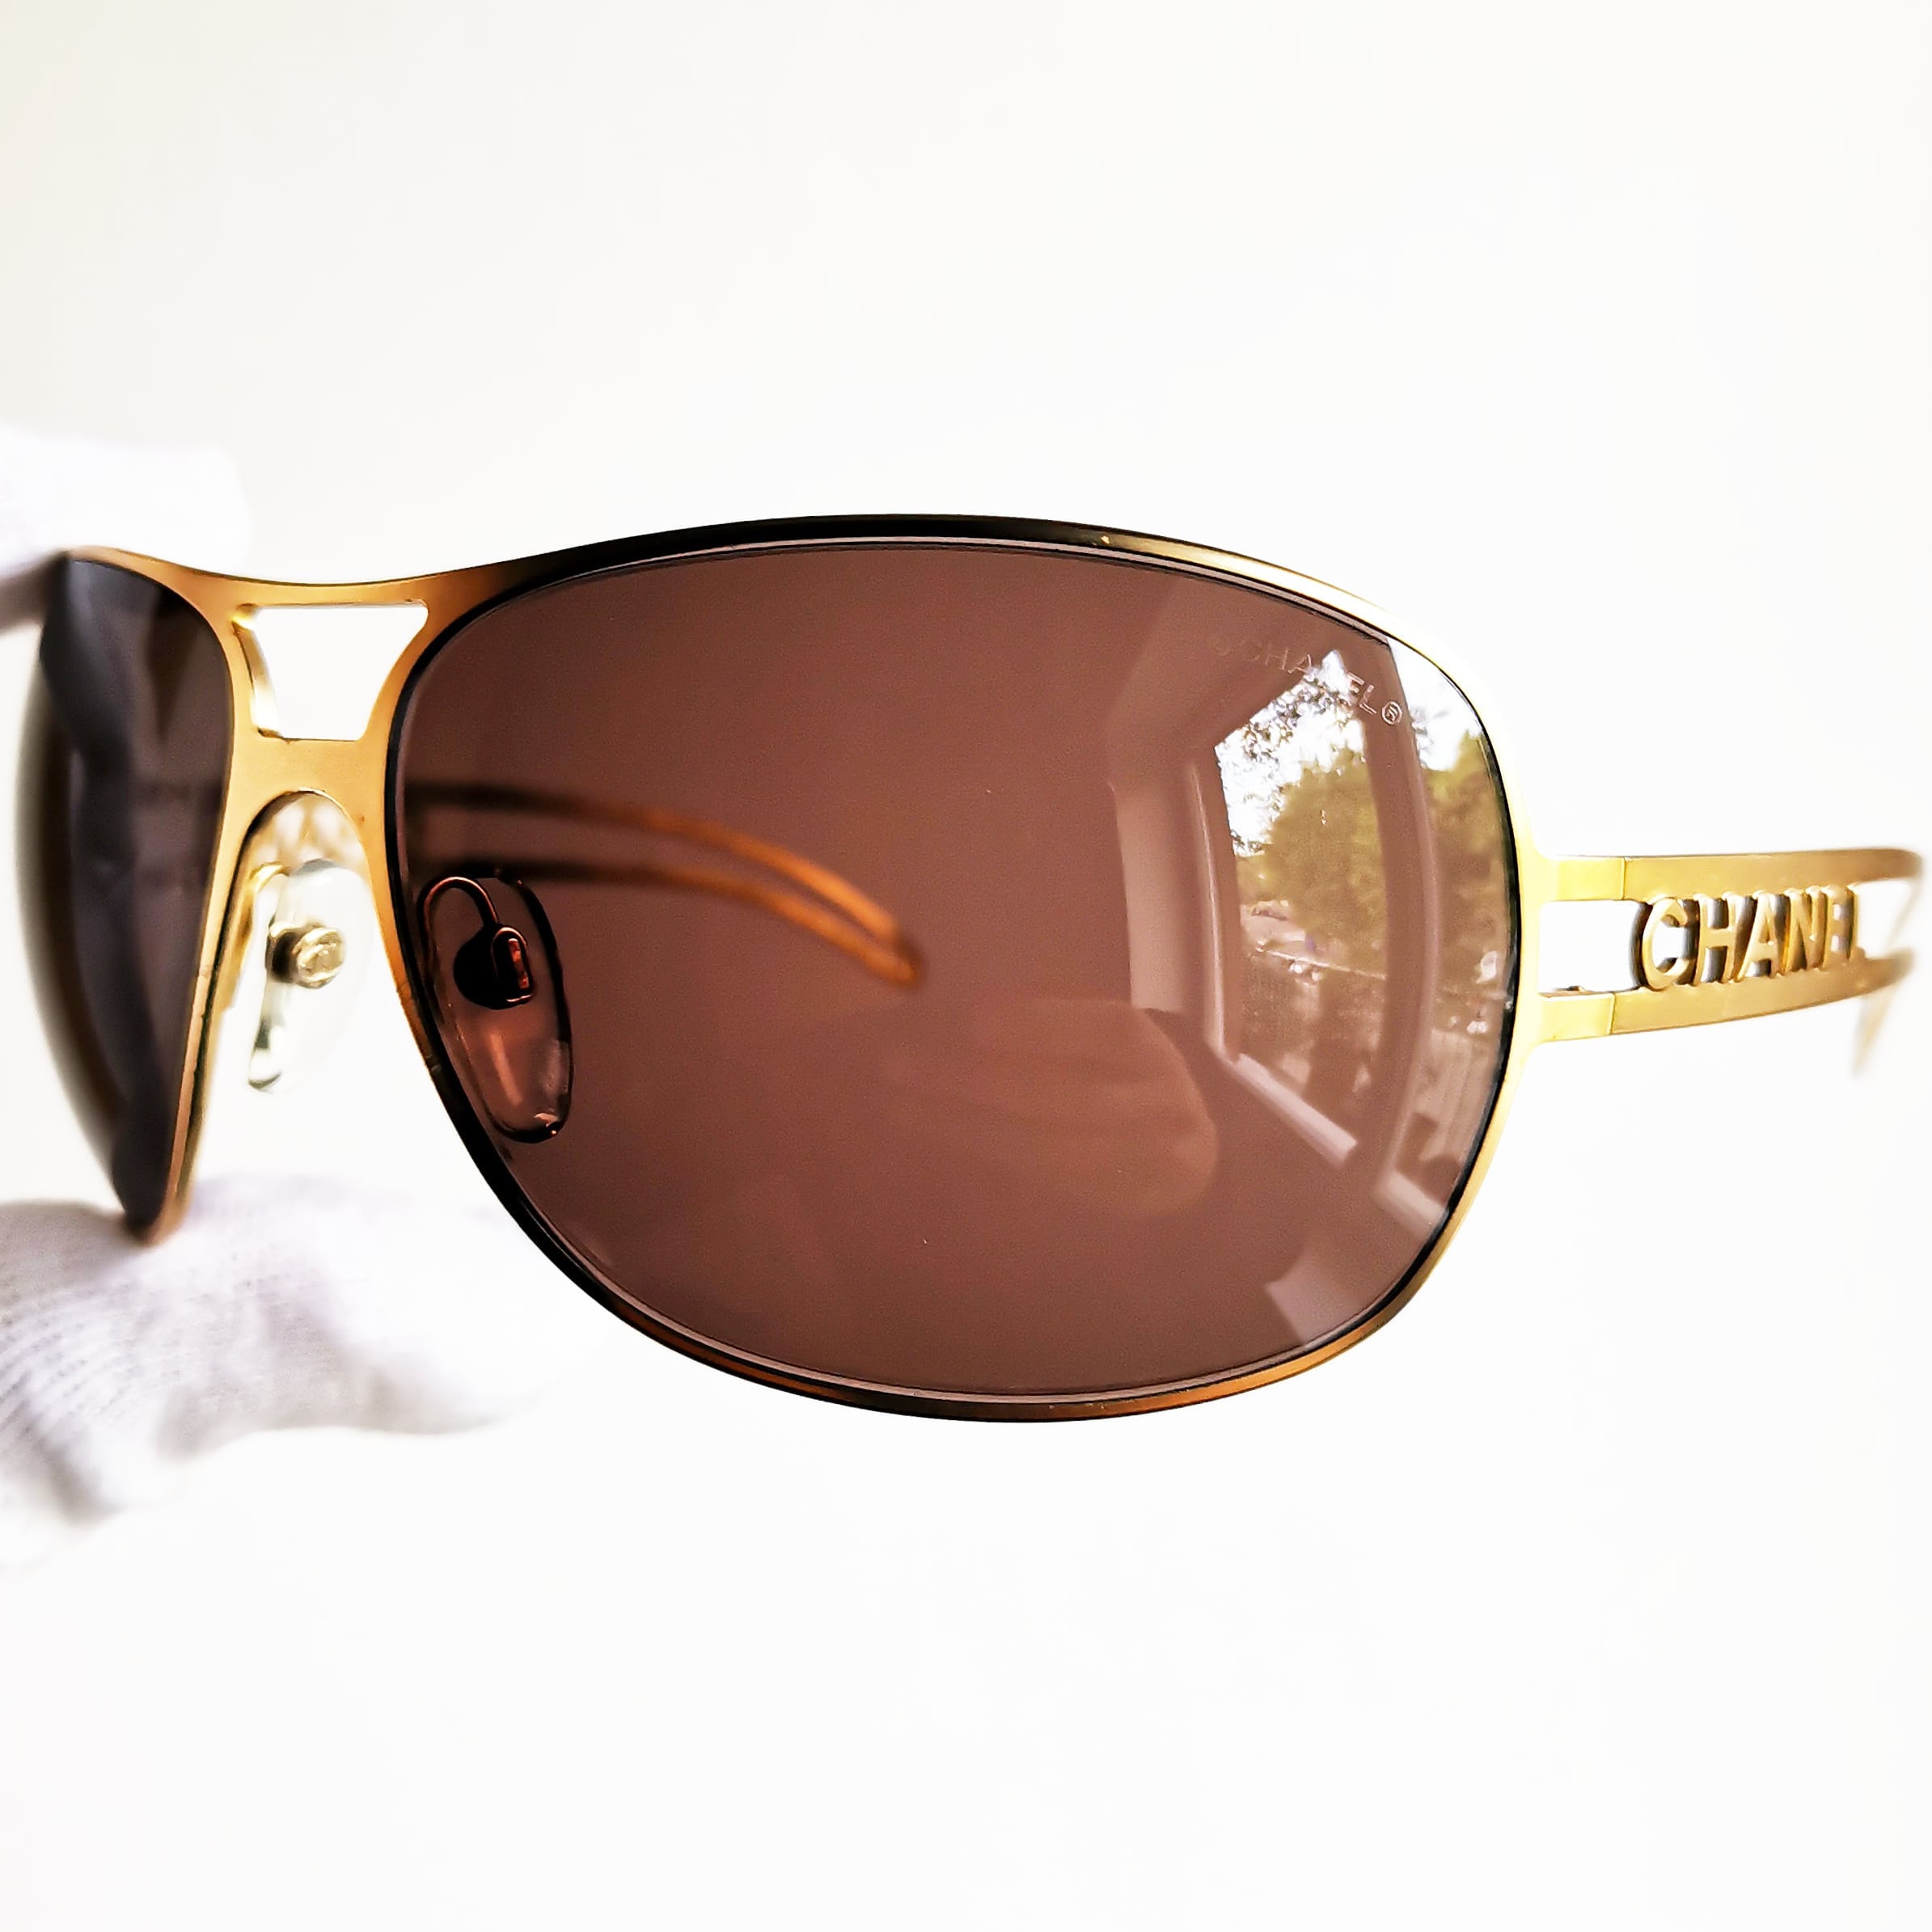 Vintage Chanel Gold Square Framed Sunglasses, From